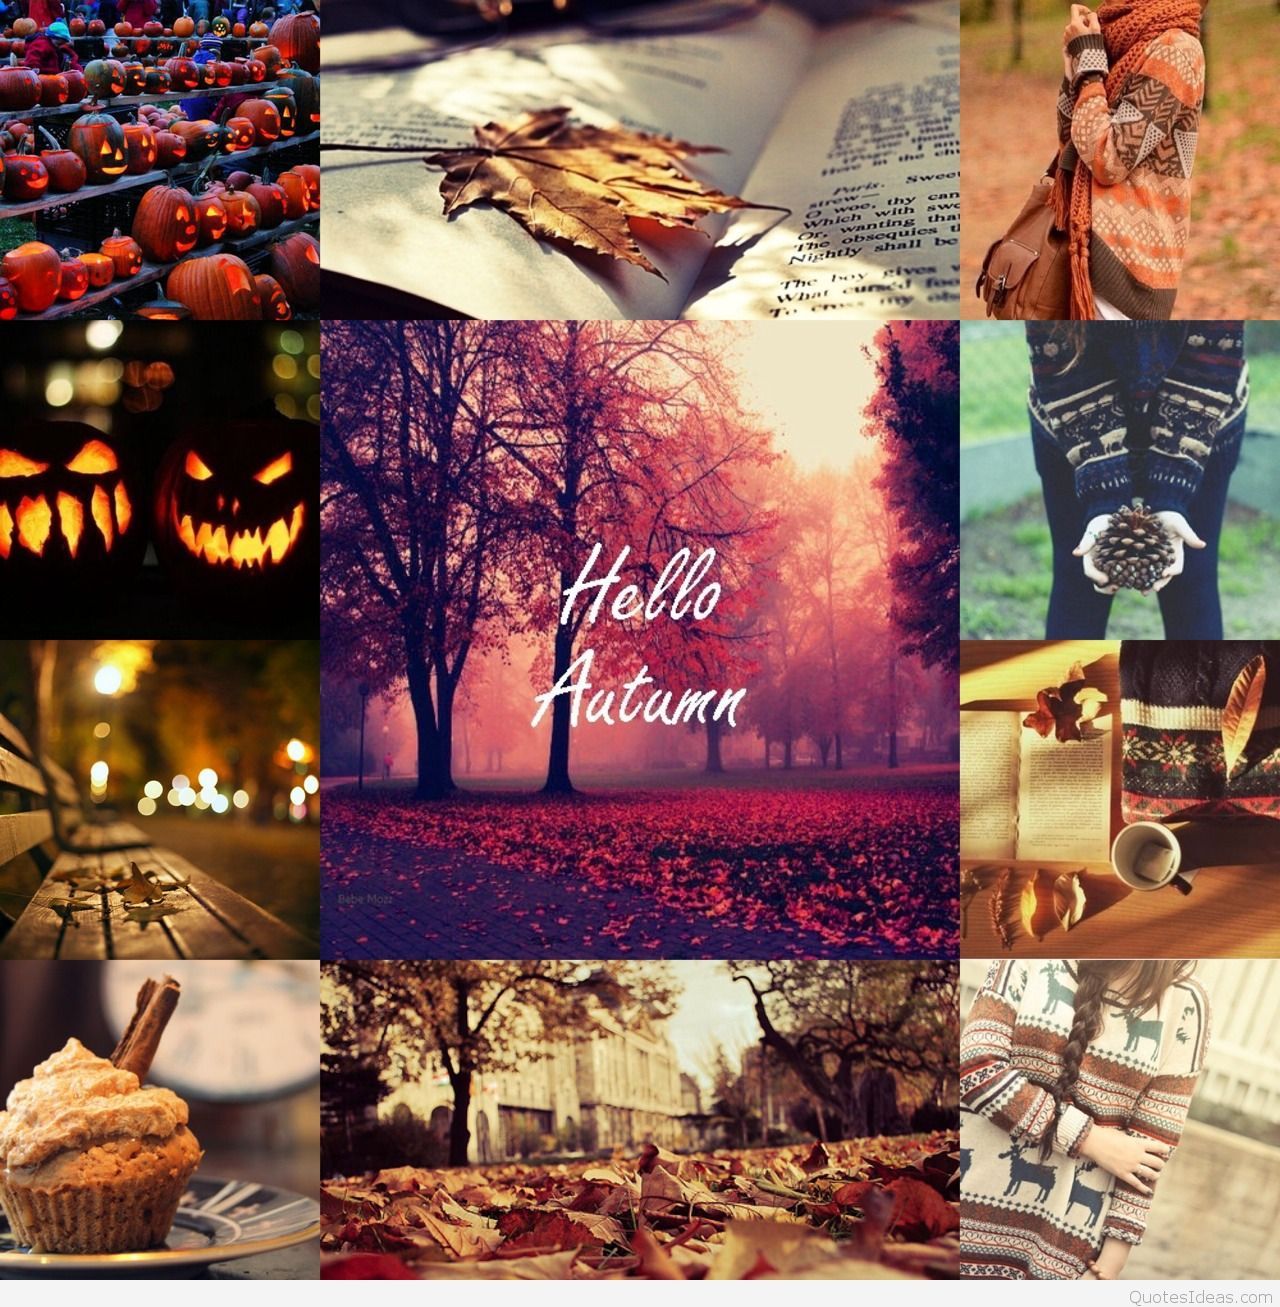 Hello Autumn sayings, image and wishes